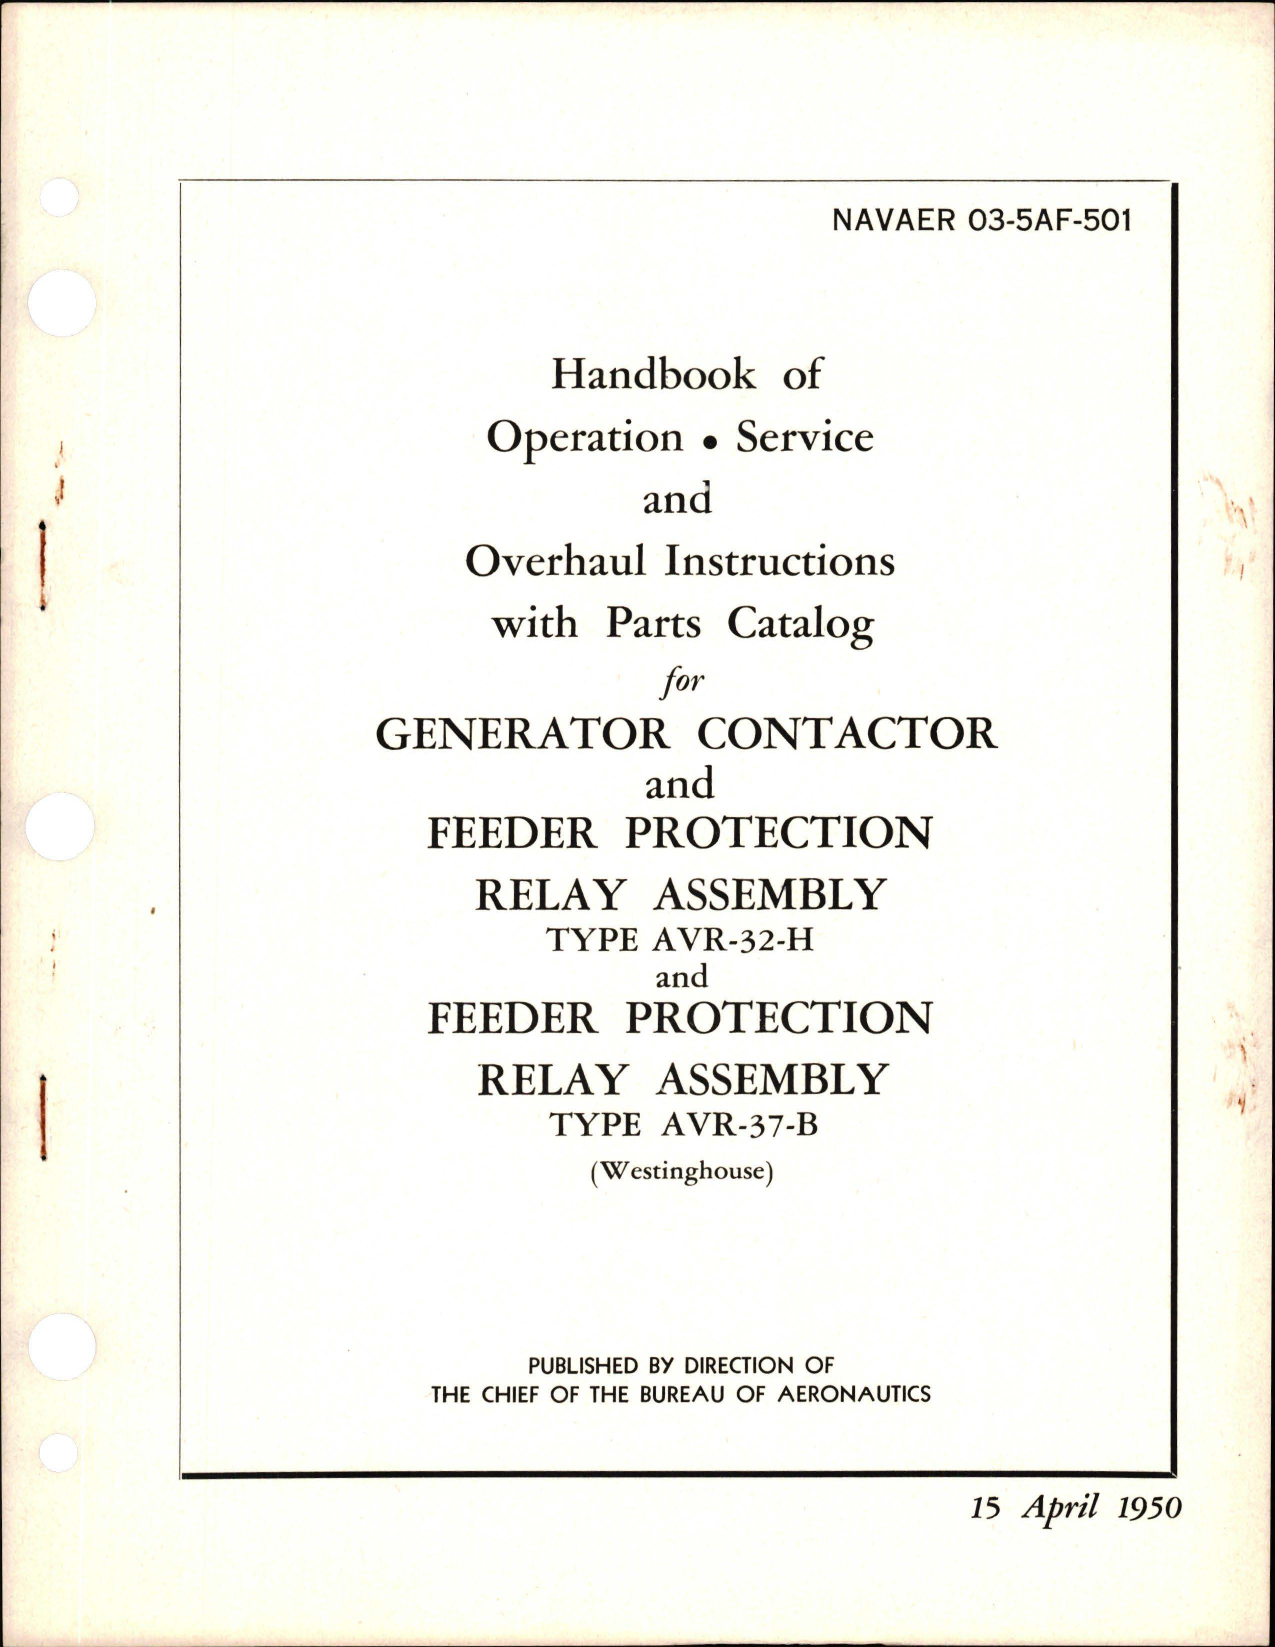 Sample page 1 from AirCorps Library document: Operation, Service and Overhaul Instructions with Parts Catalog for Generator Contactor and Feeder Protection Relay Assembly